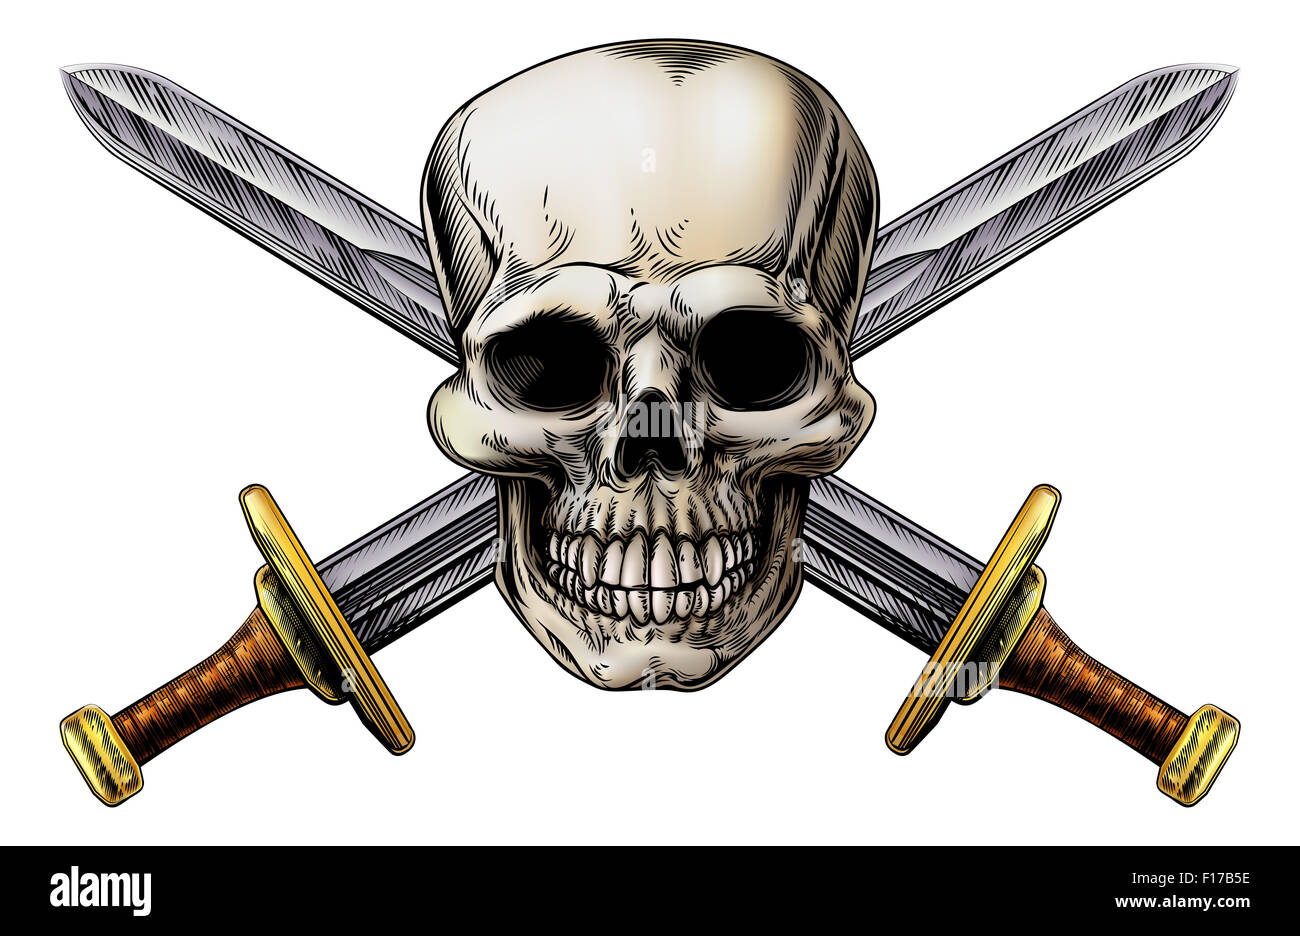 Skull and cross swords pirate symbol in a vintage woodblock style Stock Photo